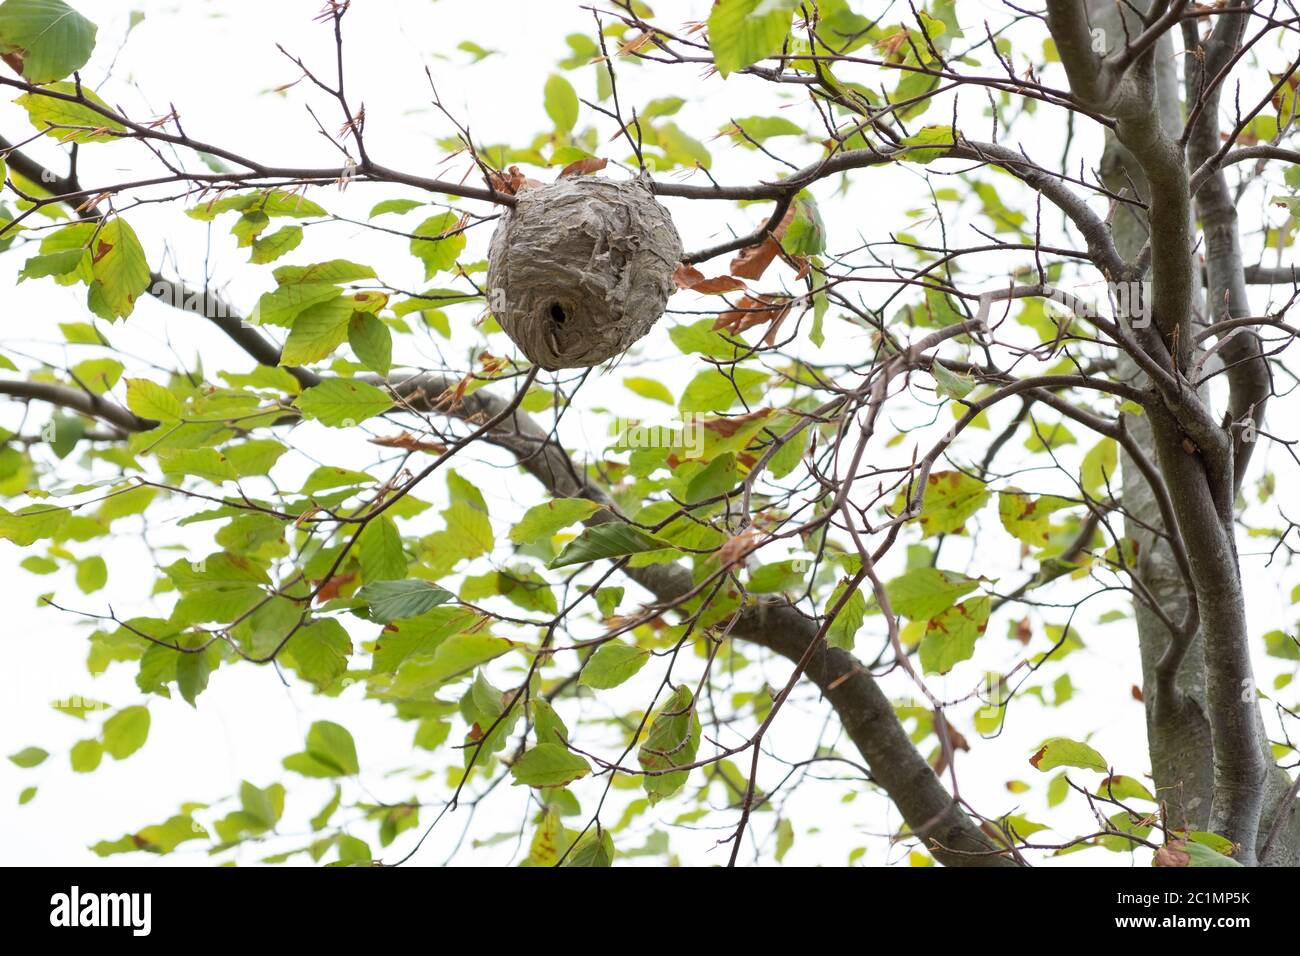 a large wasp nest hidden in the tree Stock Photo